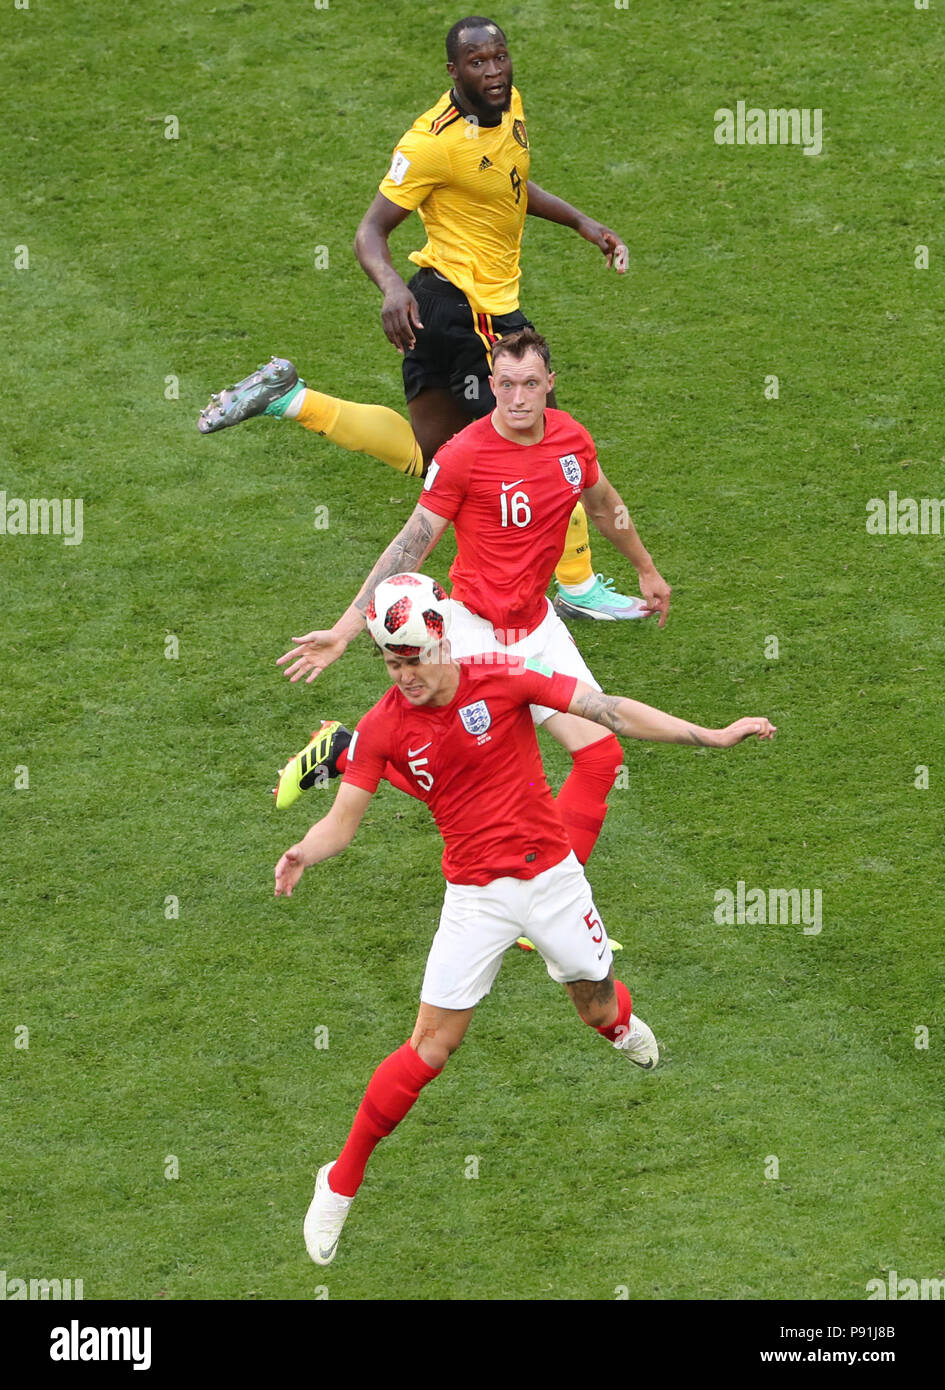 Saint Petersburg, Russia. 14th July, 2018. John Stones (bottom) of England competes for a header during the 2018 FIFA World Cup third place play-off match between England and Belgium in Saint Petersburg, Russia, July 14, 2018. Credit: Li Ming/Xinhua/Alamy Live News  Stock Photo